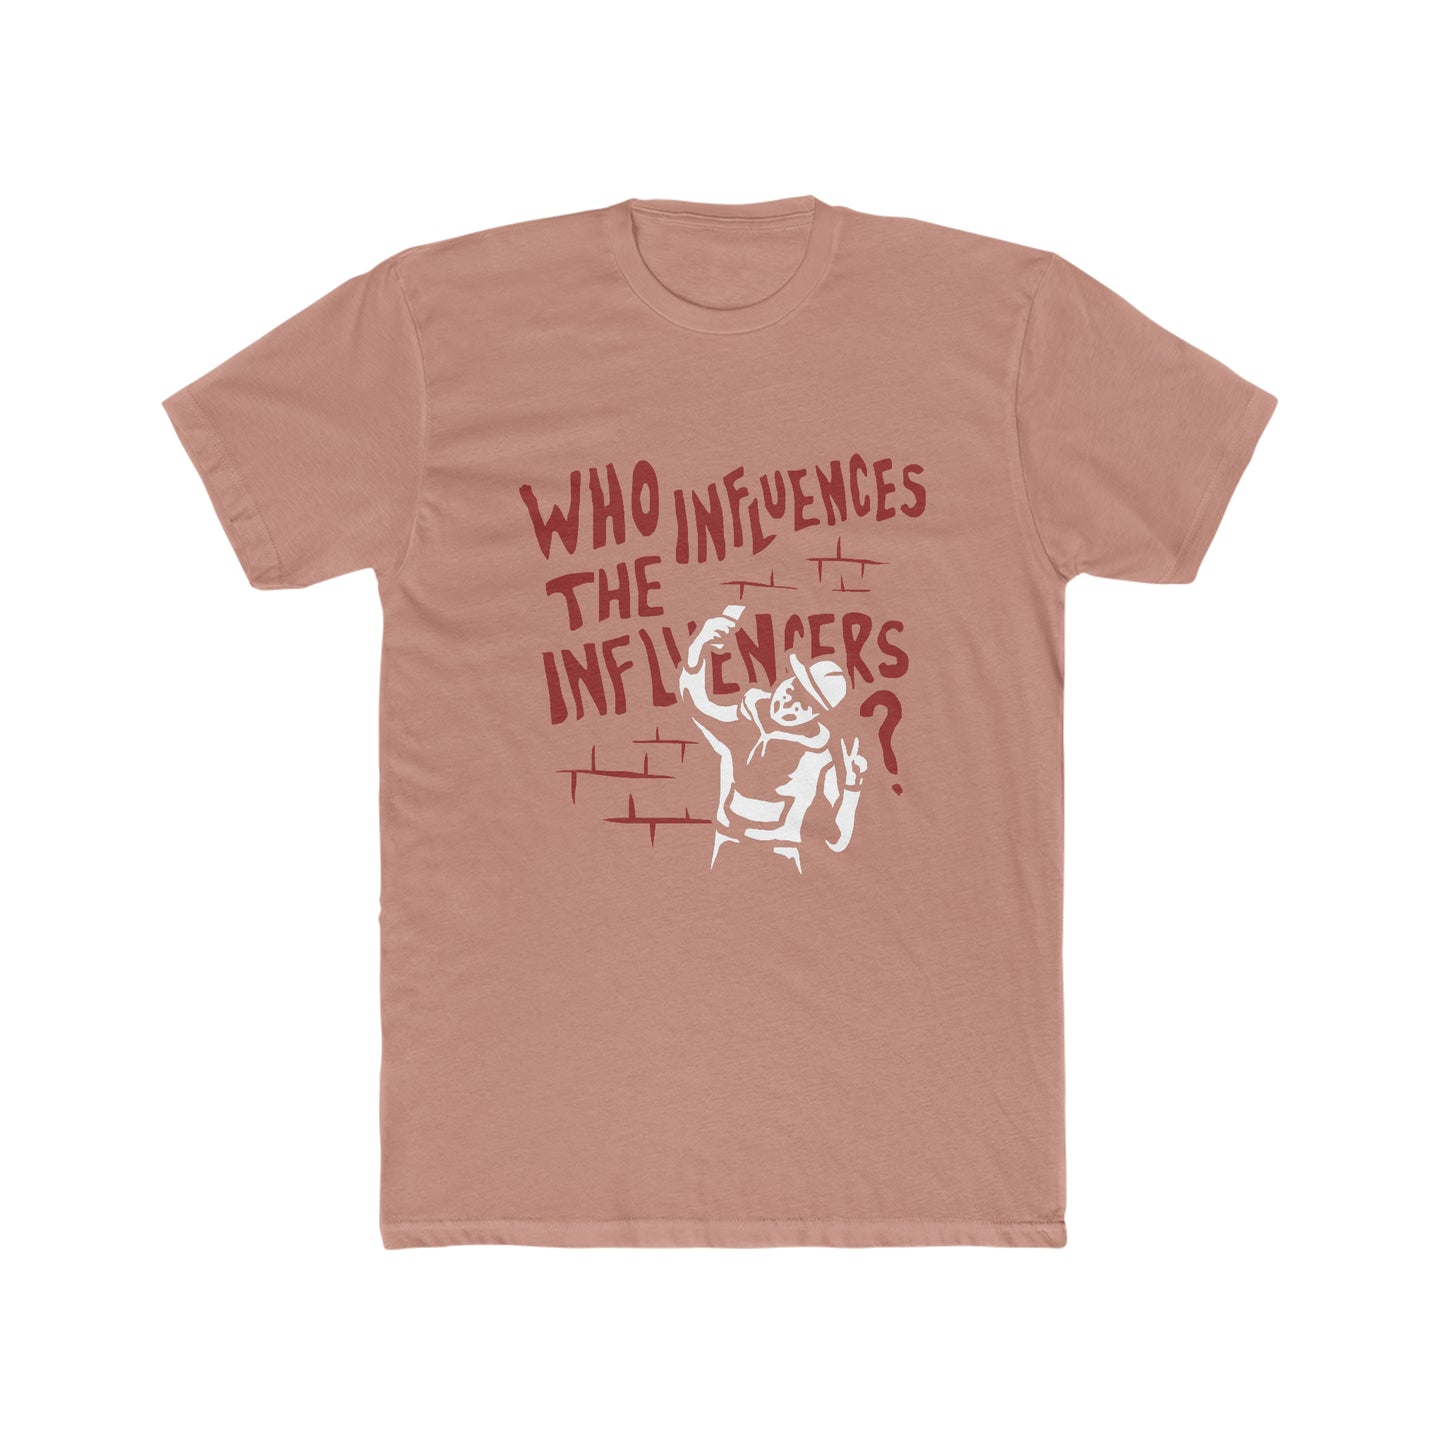 Who Influences the Influencers? T-Shirt